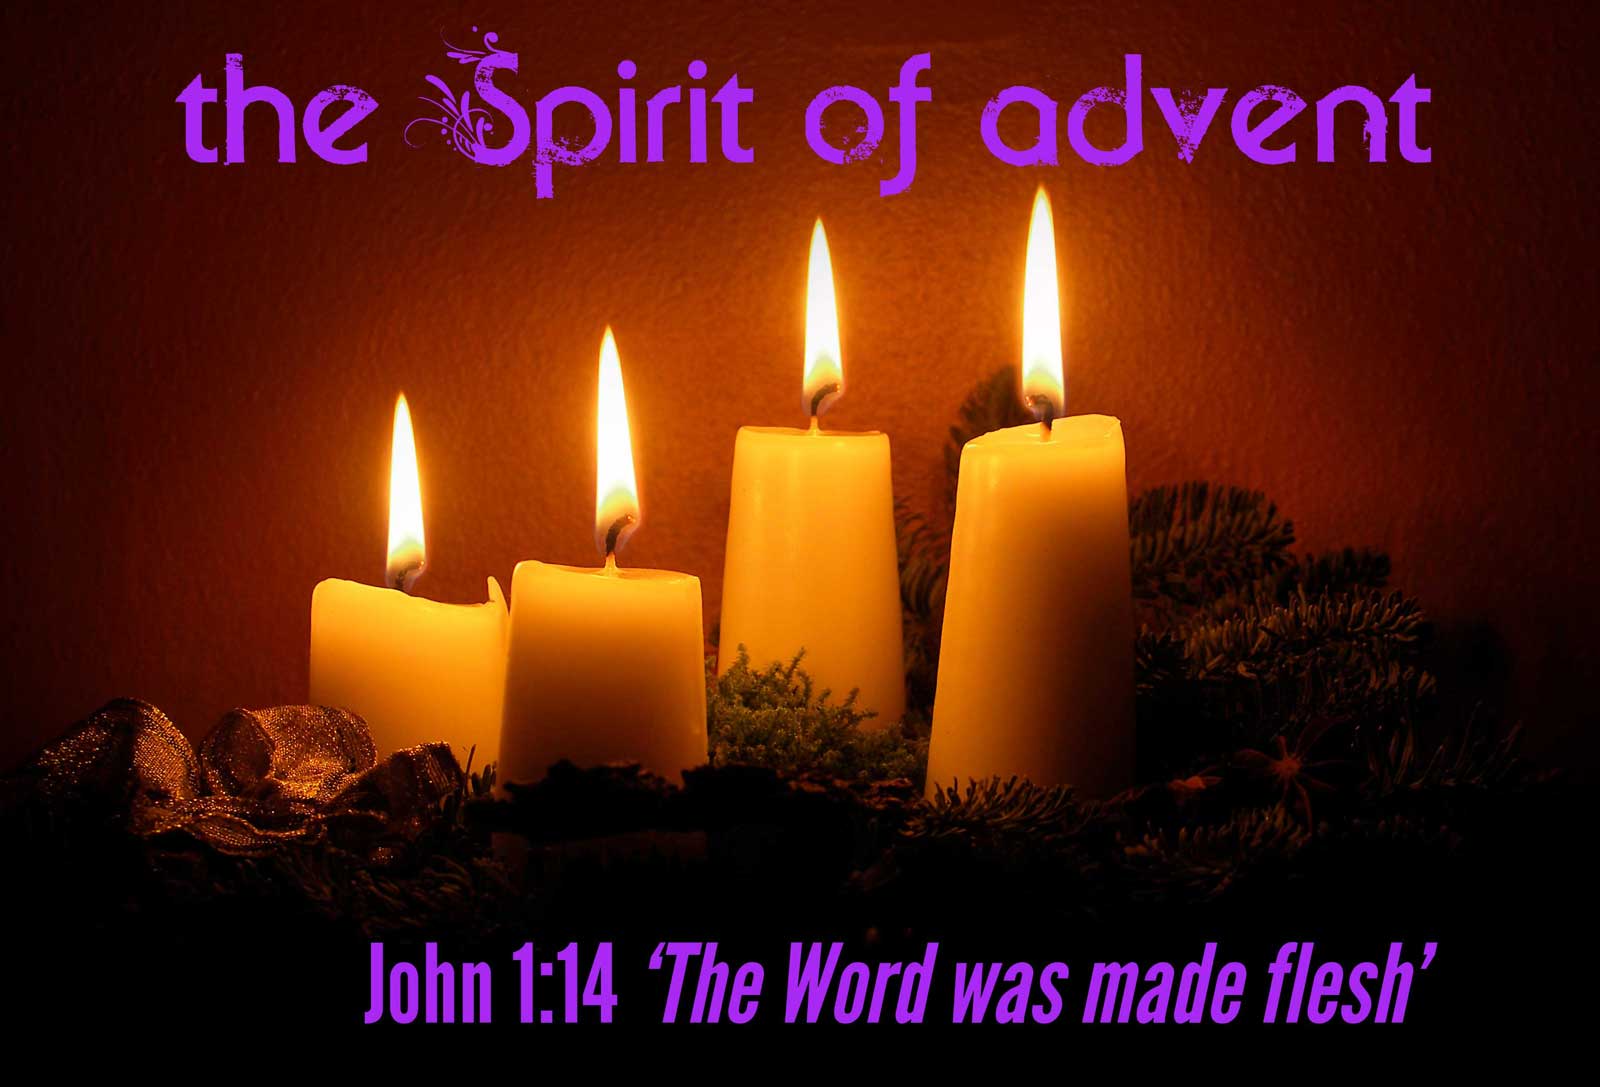 advent wallpaper,candle,lighting,text,wax,flame